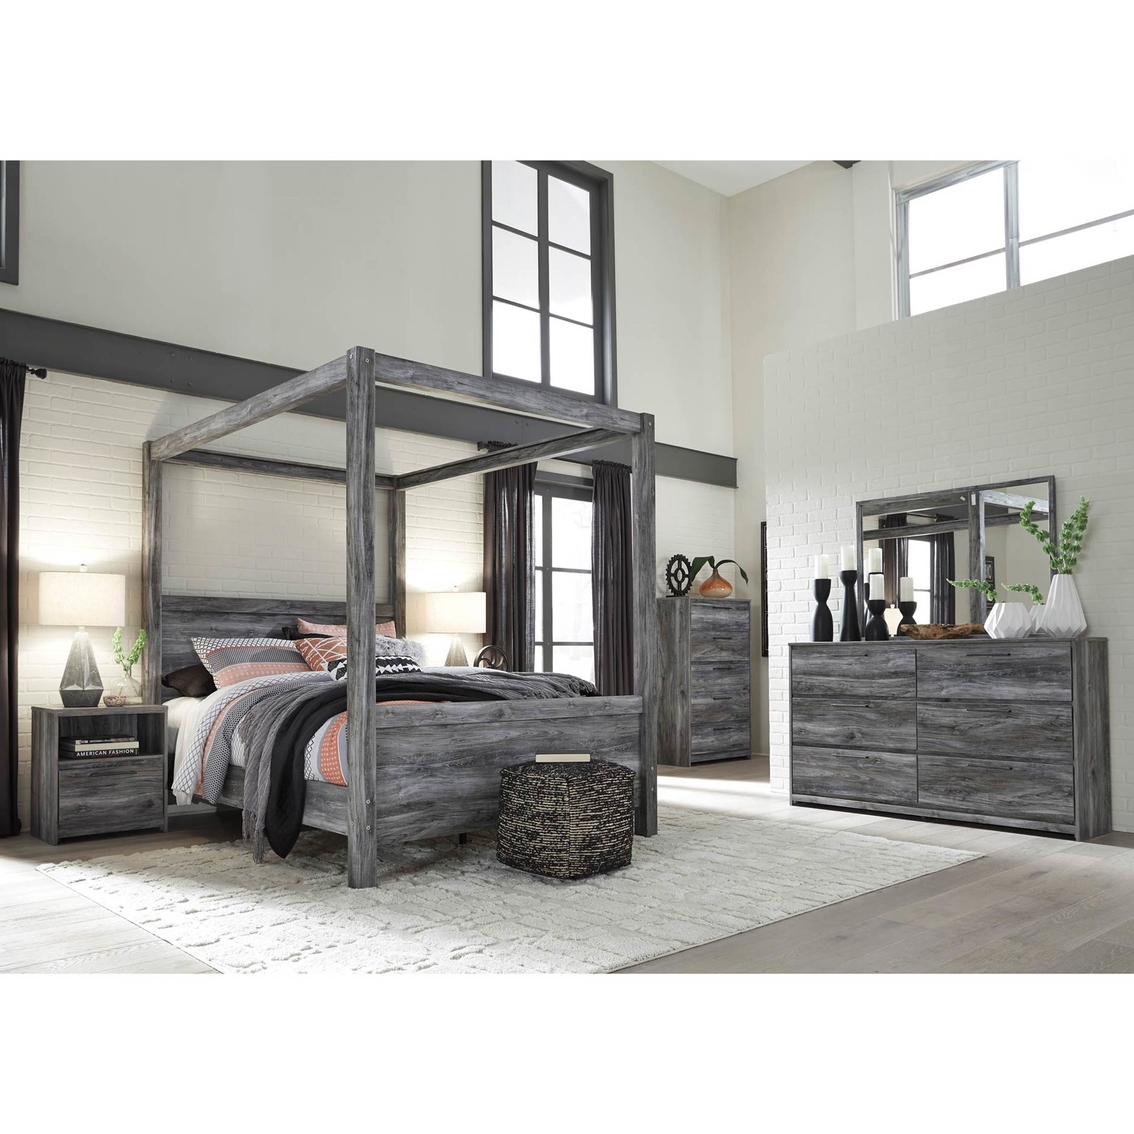 Signature Design by Ashley Baystorm Canopy Bed 5 pc. Set - Image 2 of 2